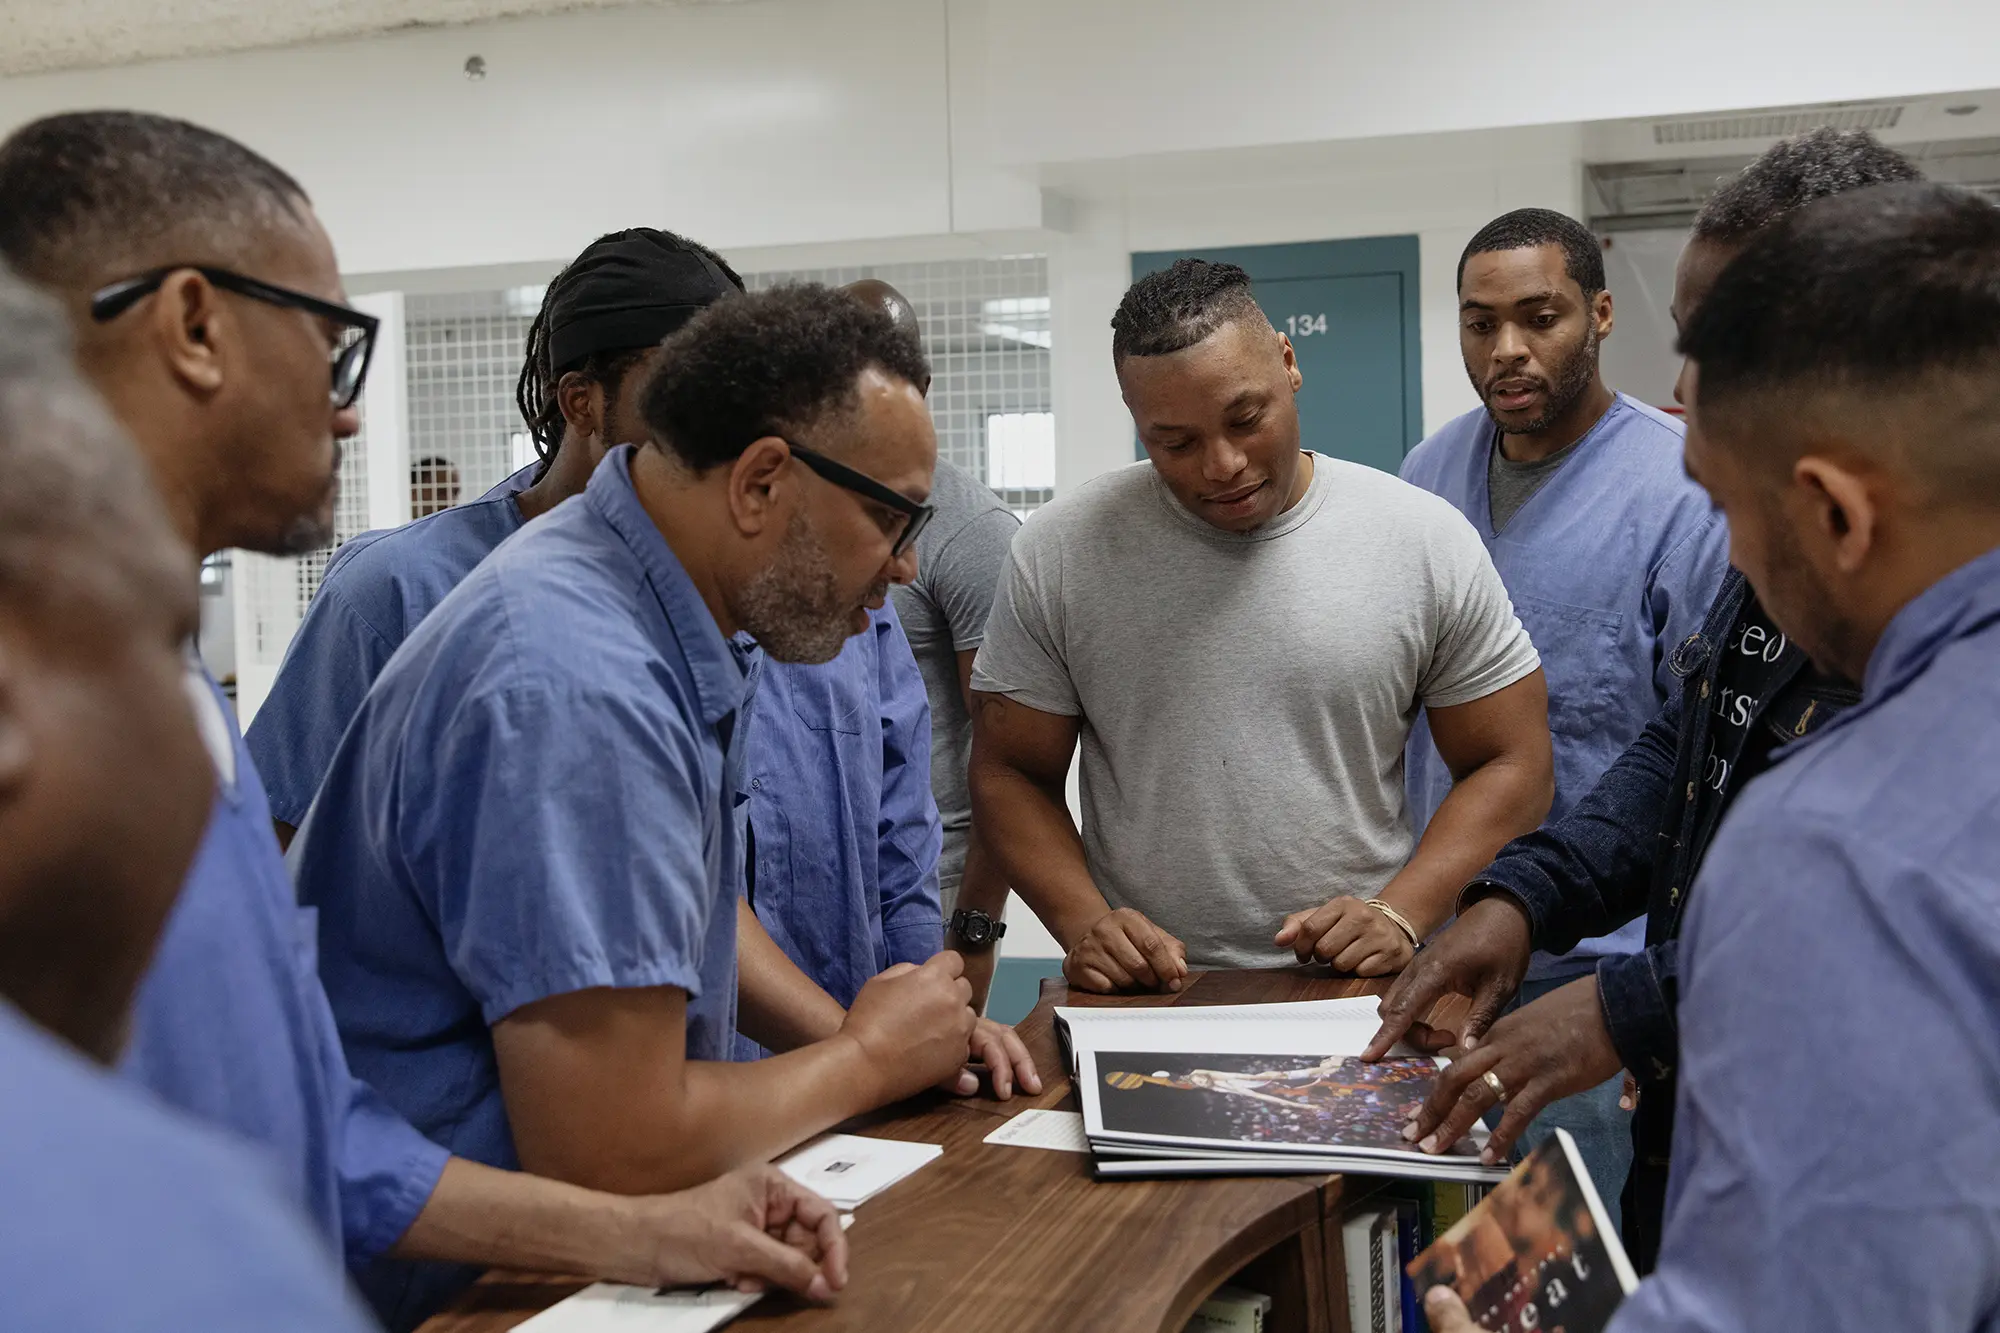 Men clad in blue gather around a wooden Freedom Library bookcase discussing a copy of Reginald Dwayne Betts and Titus Kaphar’s Redaction book.